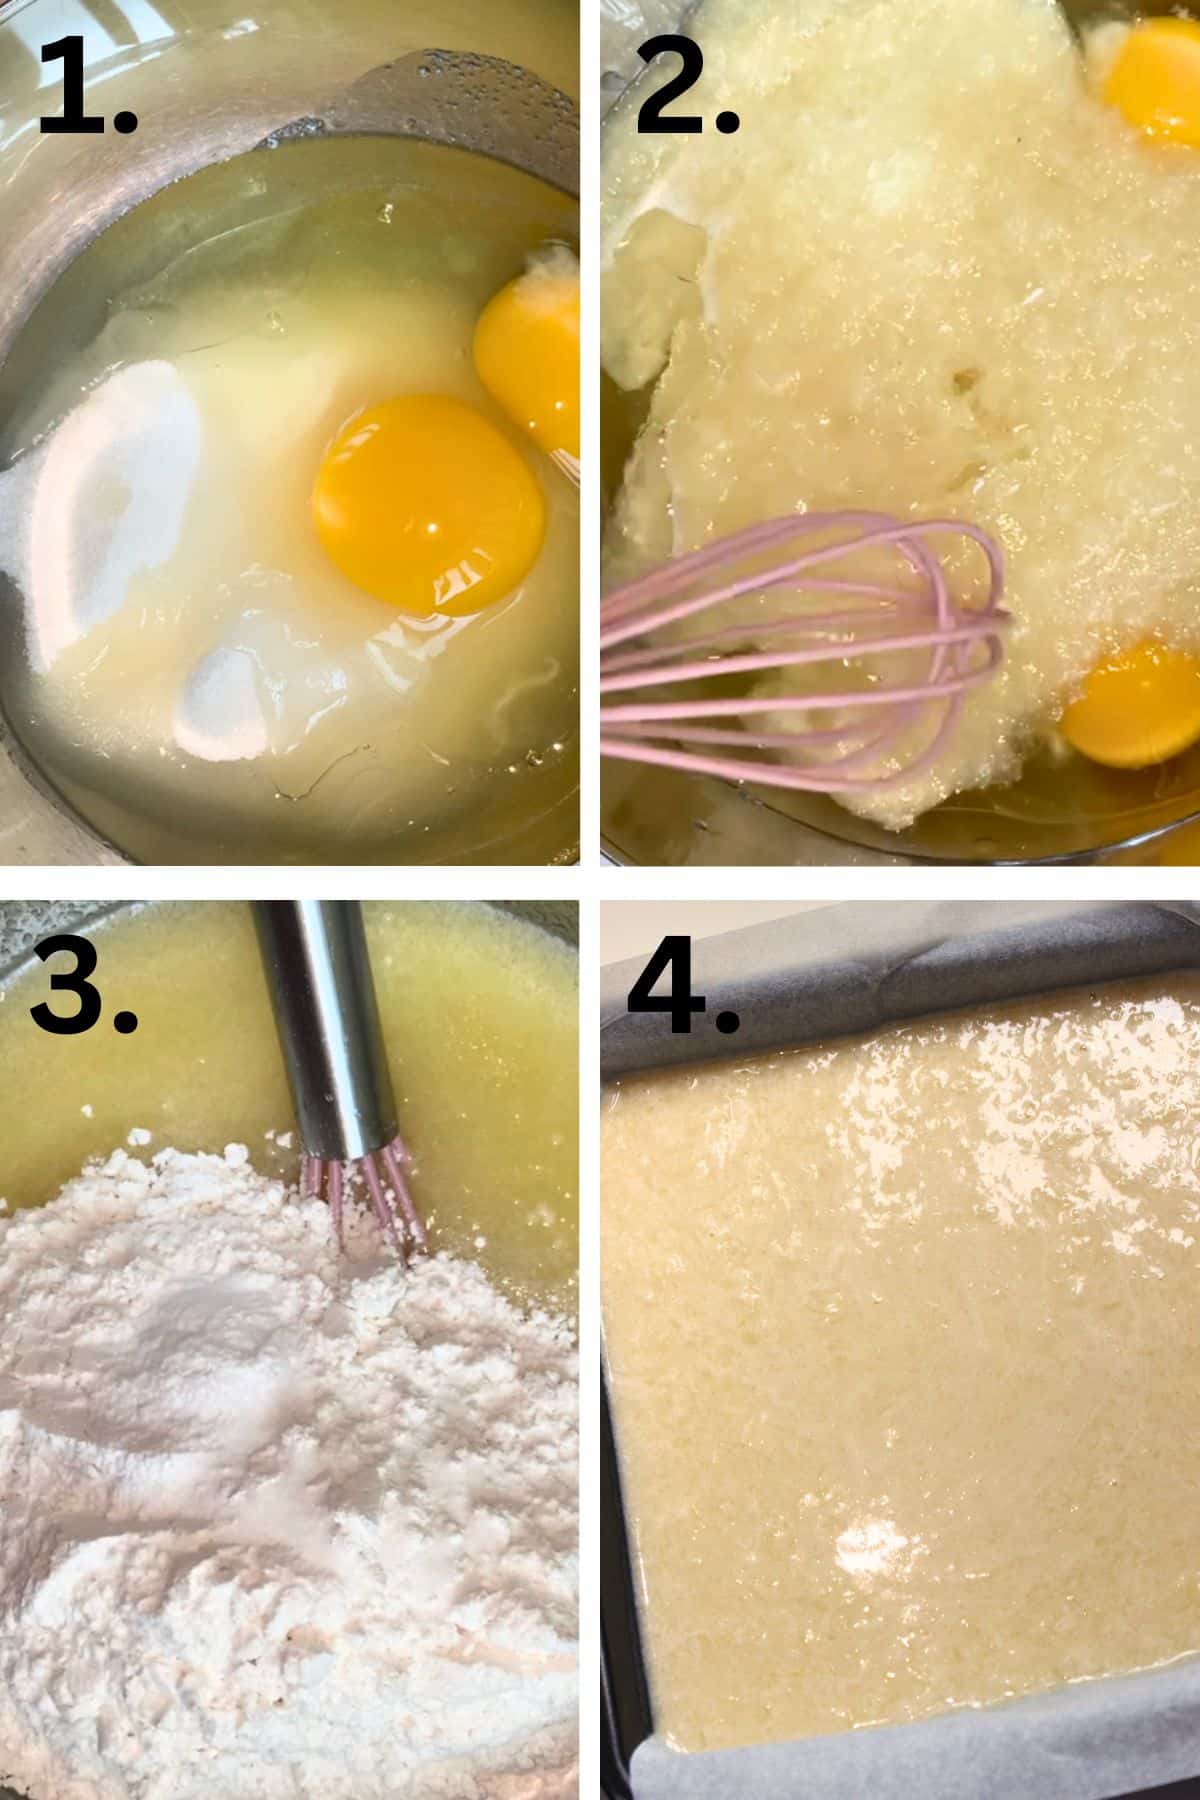 Step by step process shots of how to make pineapple cake. Mixing wet, then mixing dry ingredients into wet.